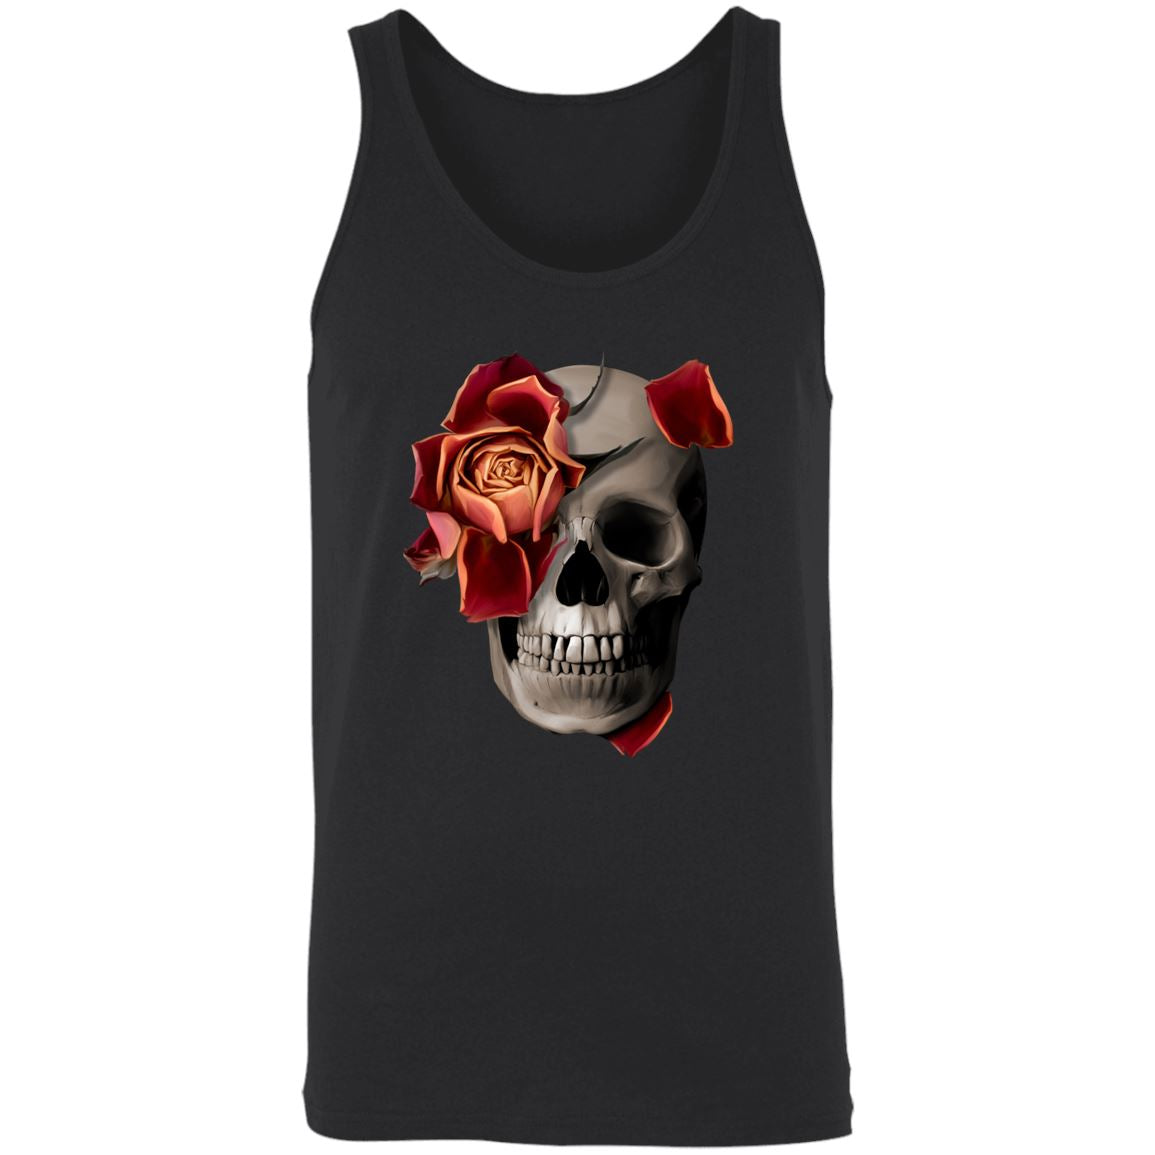 A Rose on the Skull Apparel